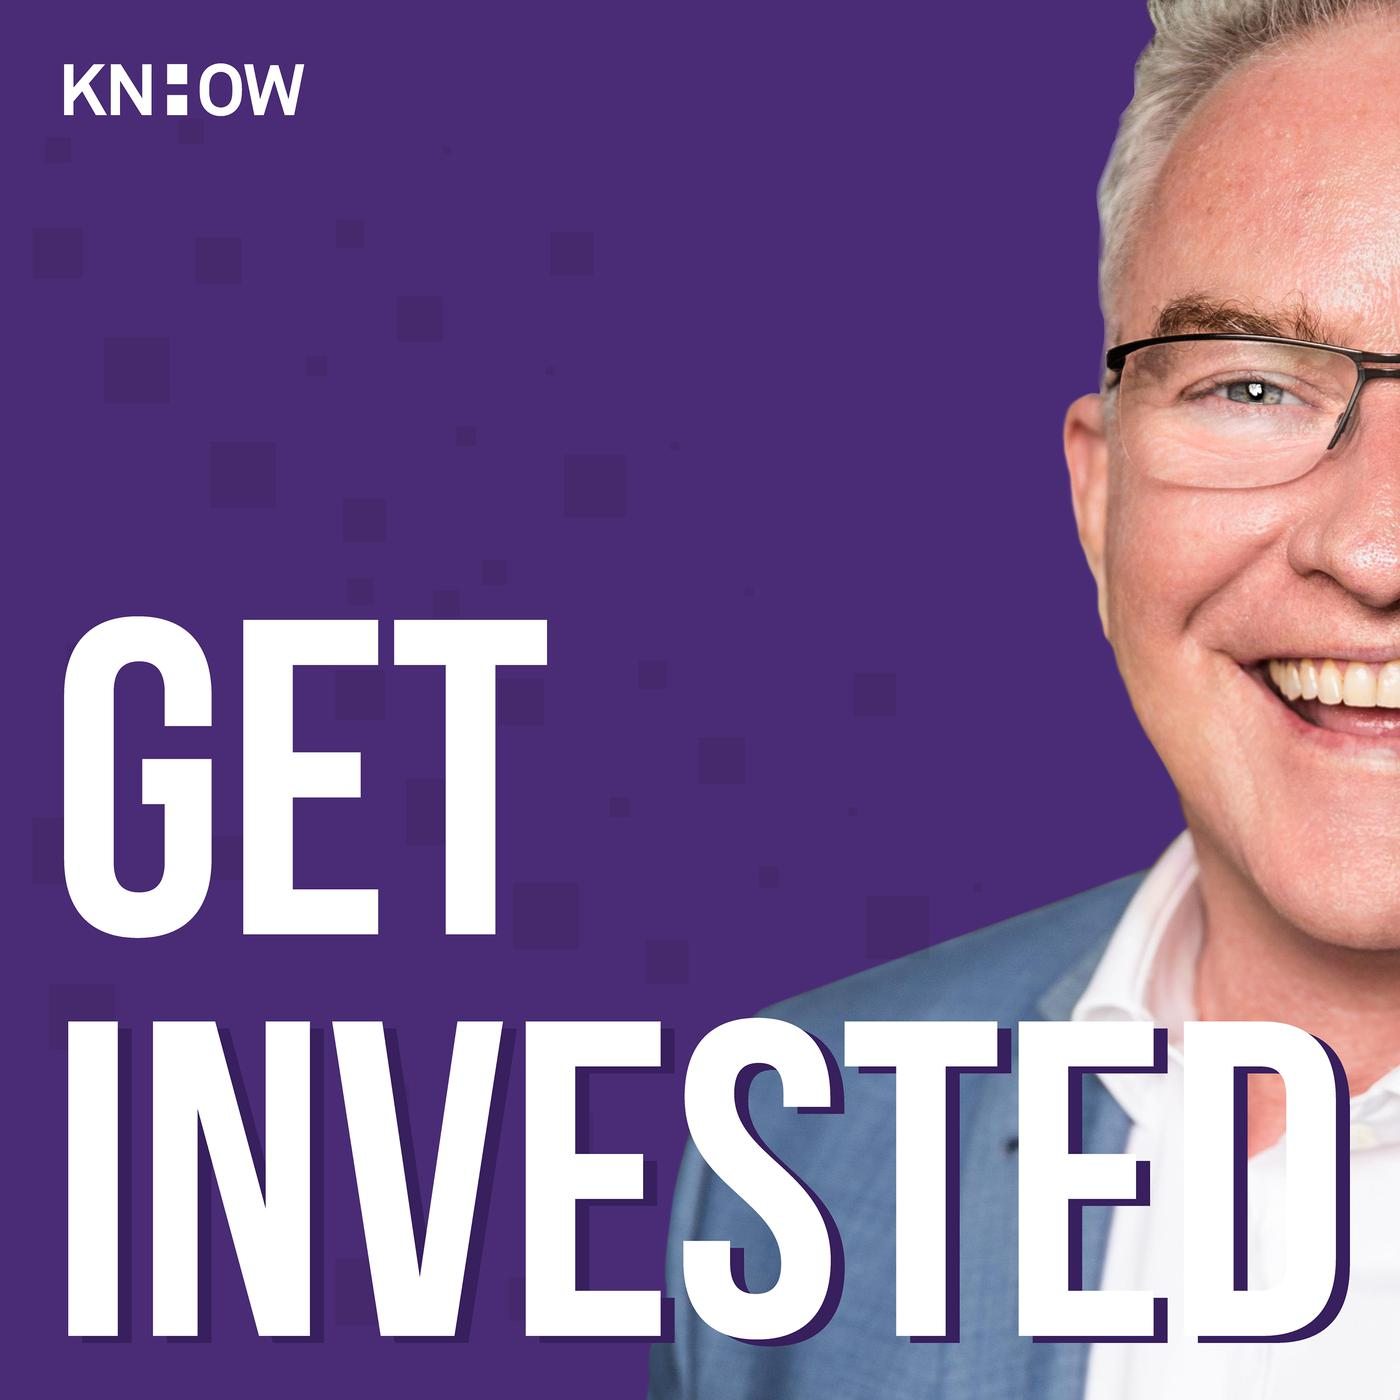 Get Invested: Part 2 - Bill Heestand on investing in business succession